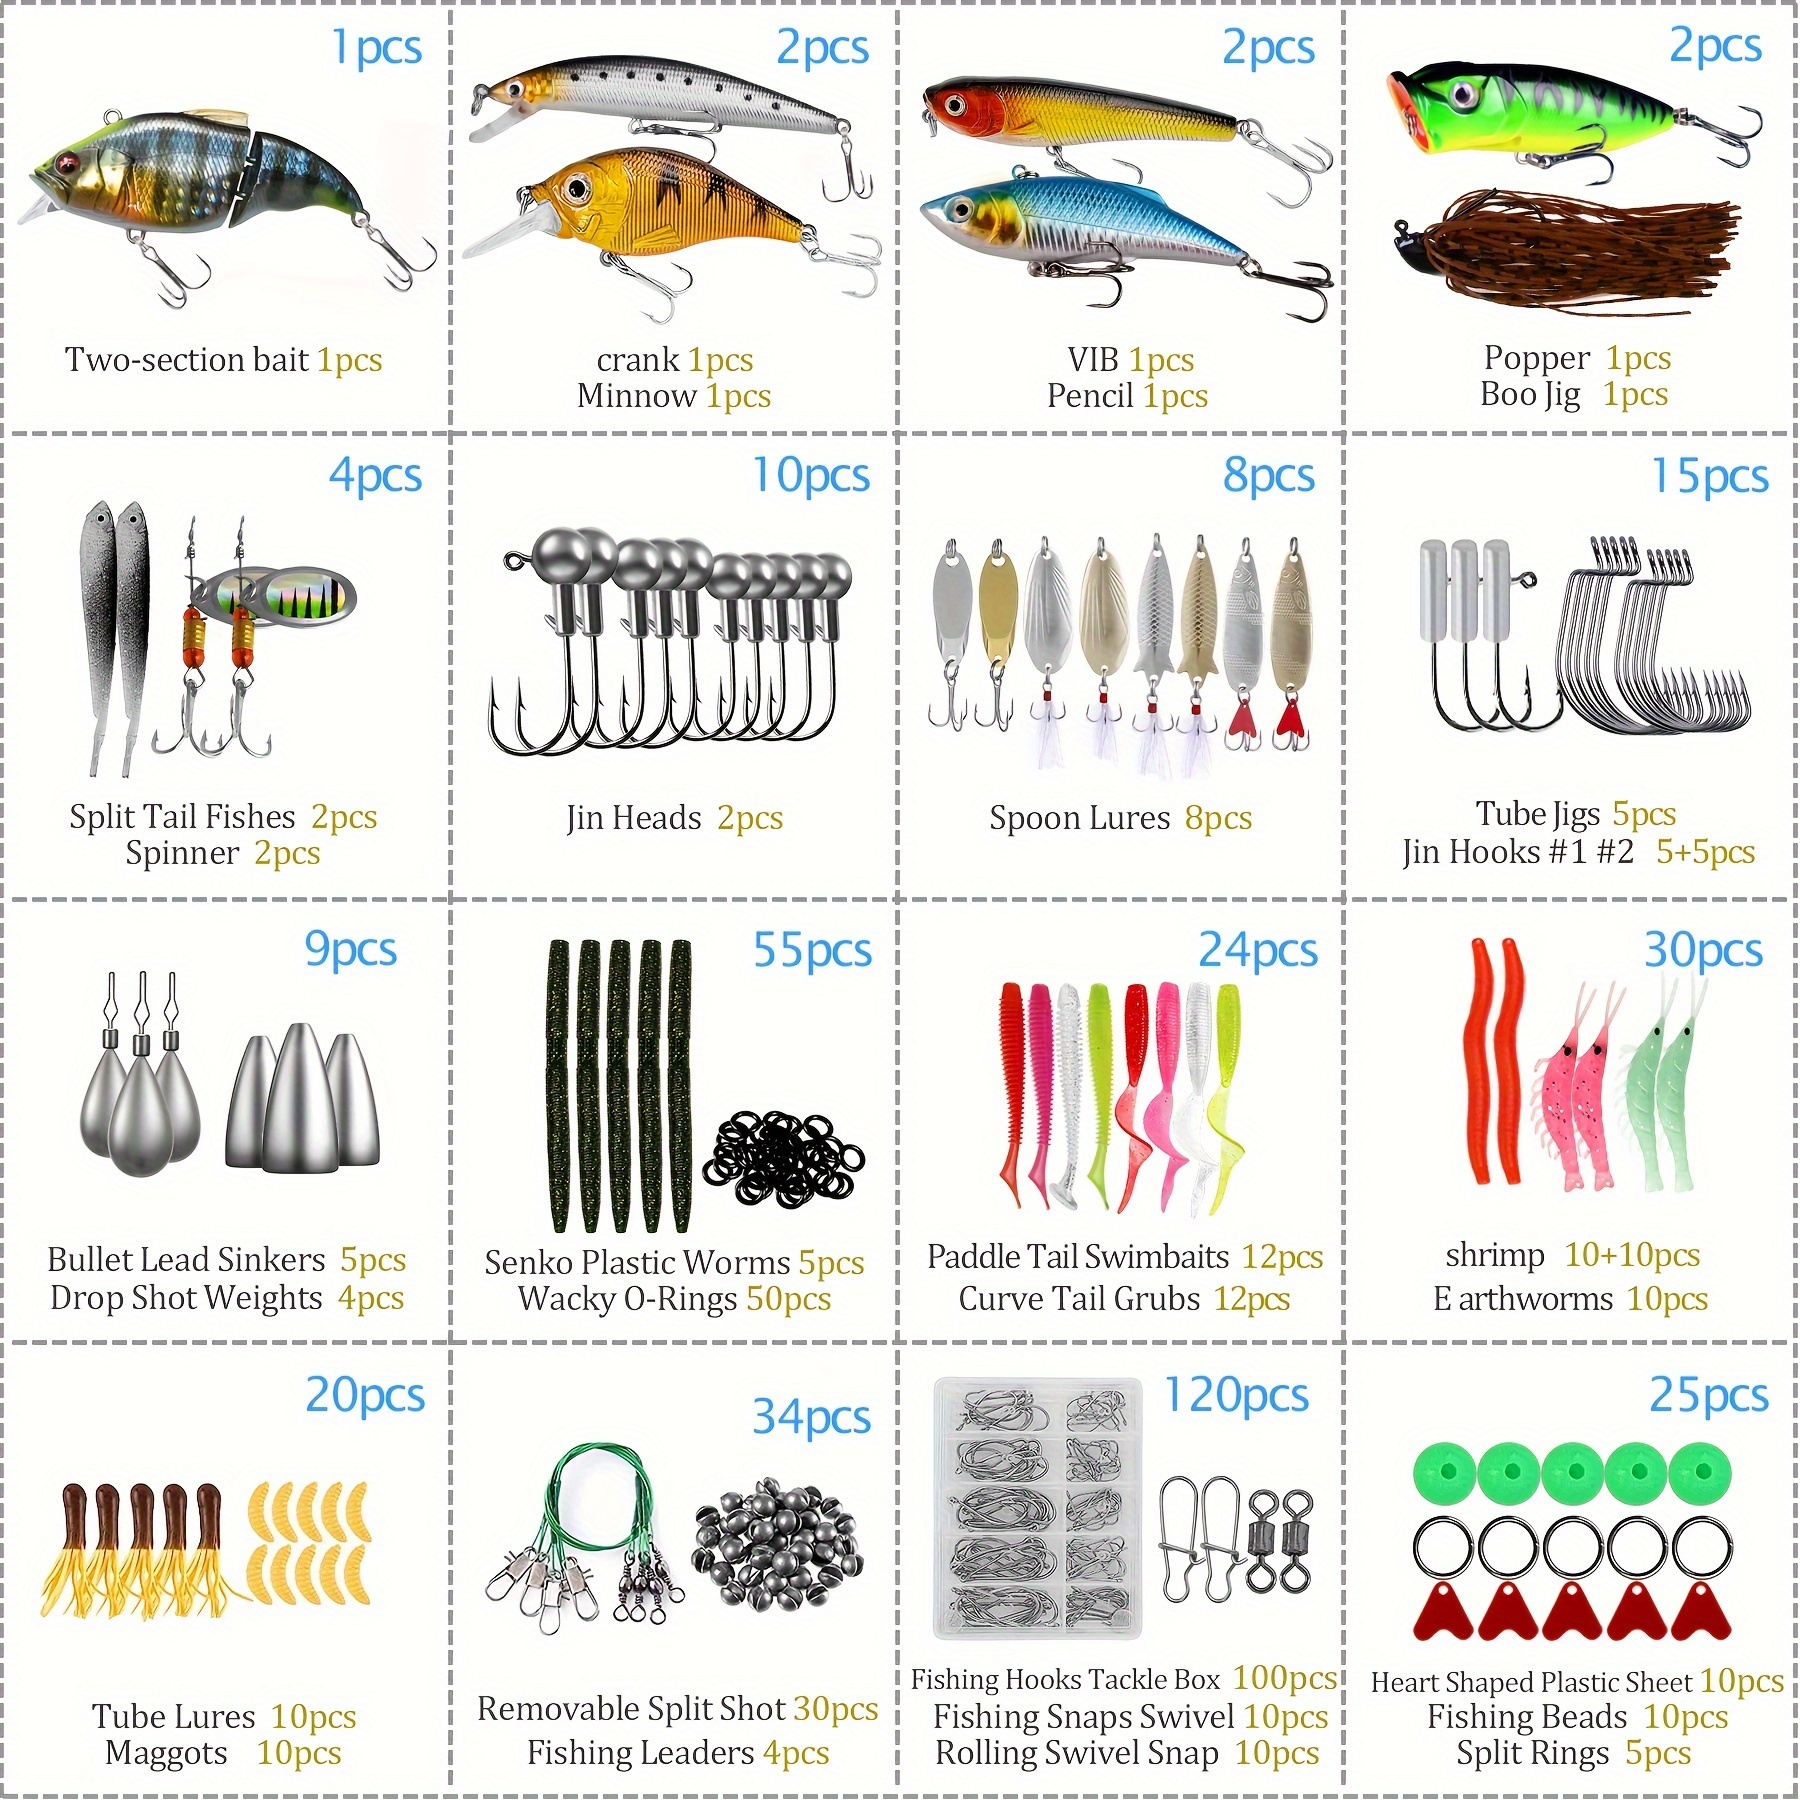  GOANDO Fishing Lures Kit 302Pcs Accessories Set for Bass Trout  Salmon with Topwater Lures Crankbaits Spinnerbaits Spoon Worms Jigs and  More Fishing Gear with Tackle Box : Sports & Outdoors